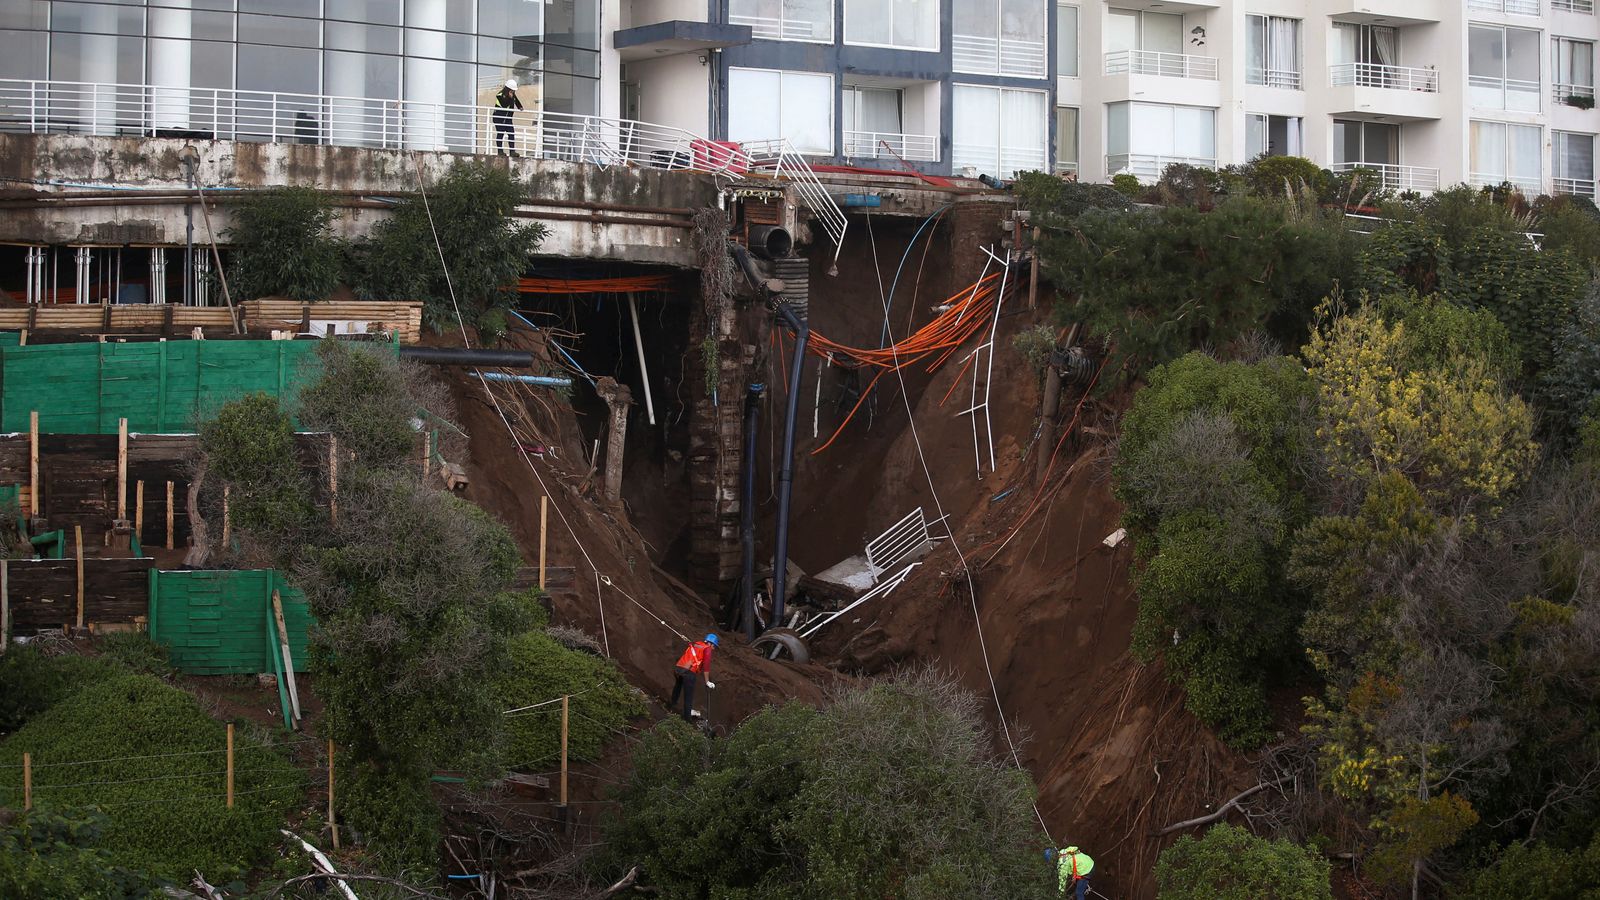 Chilean residents live in fear as homes stand precariously above sinkhole